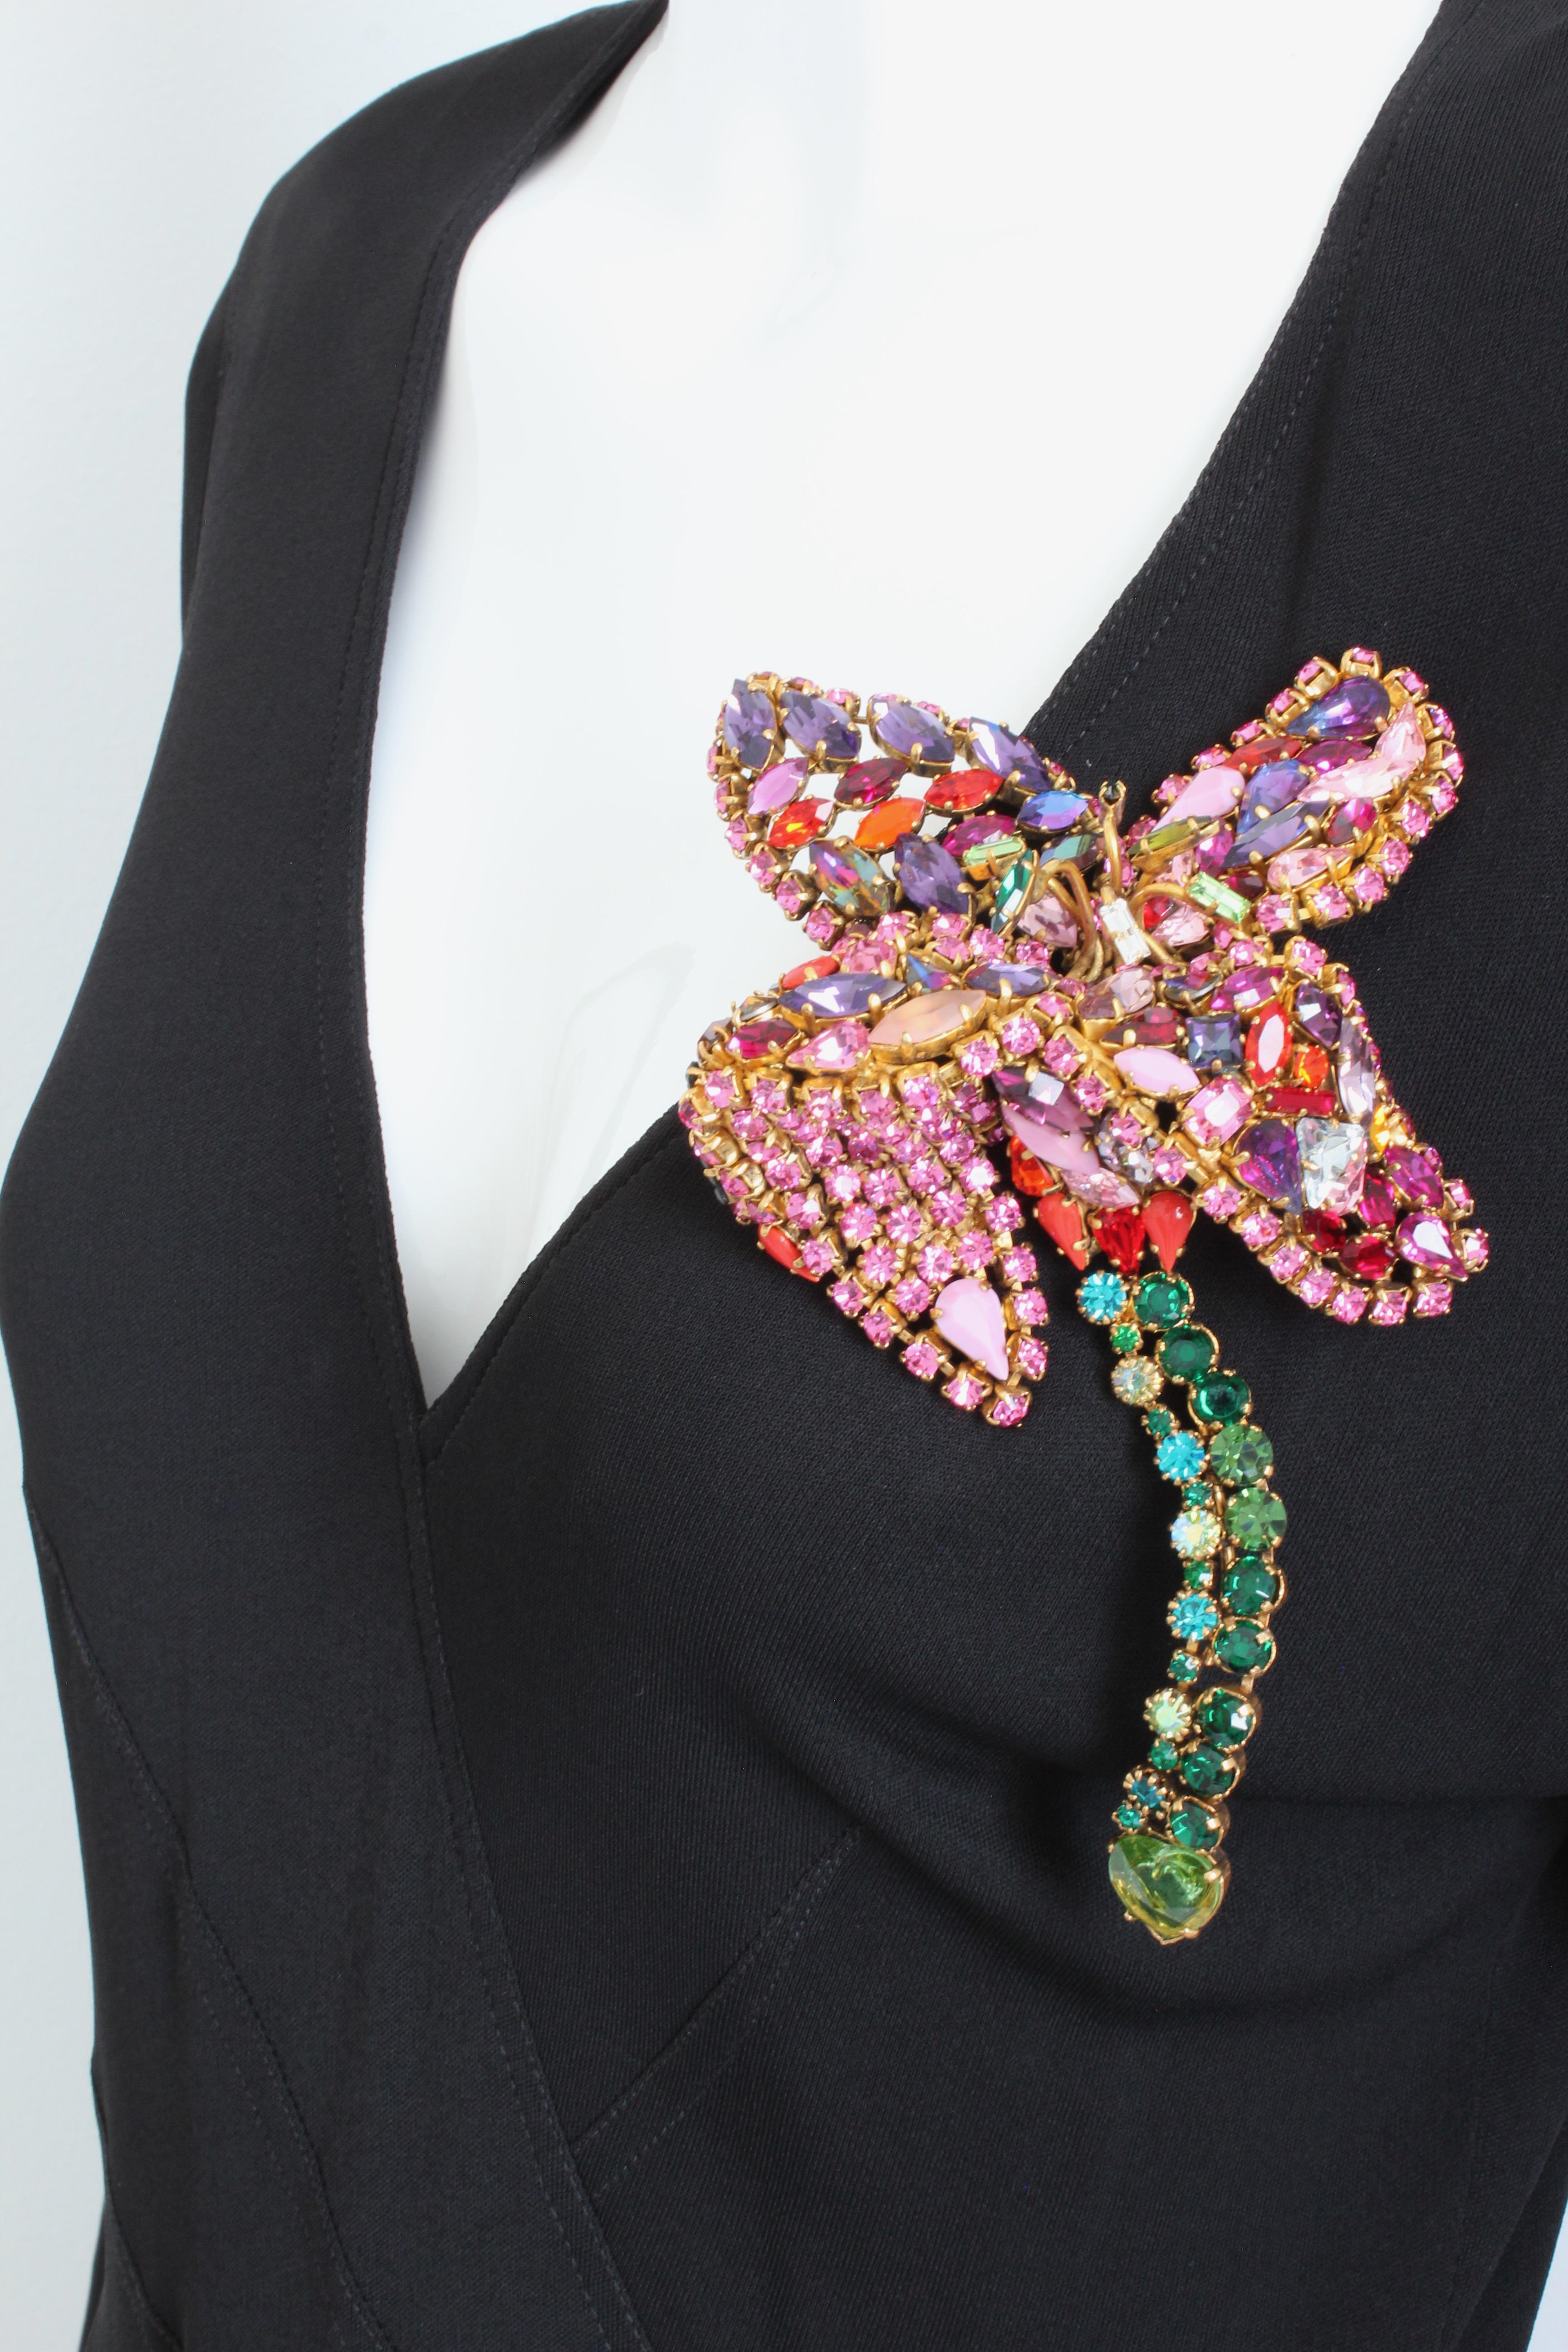 Like making a statement? This one-of-a-kind floral brooch was created by Hanna Bernhard Paris and features an array of colorful crystals and gemstones, handset on a gold-fired copper setting. This piece features articulated components on the stem